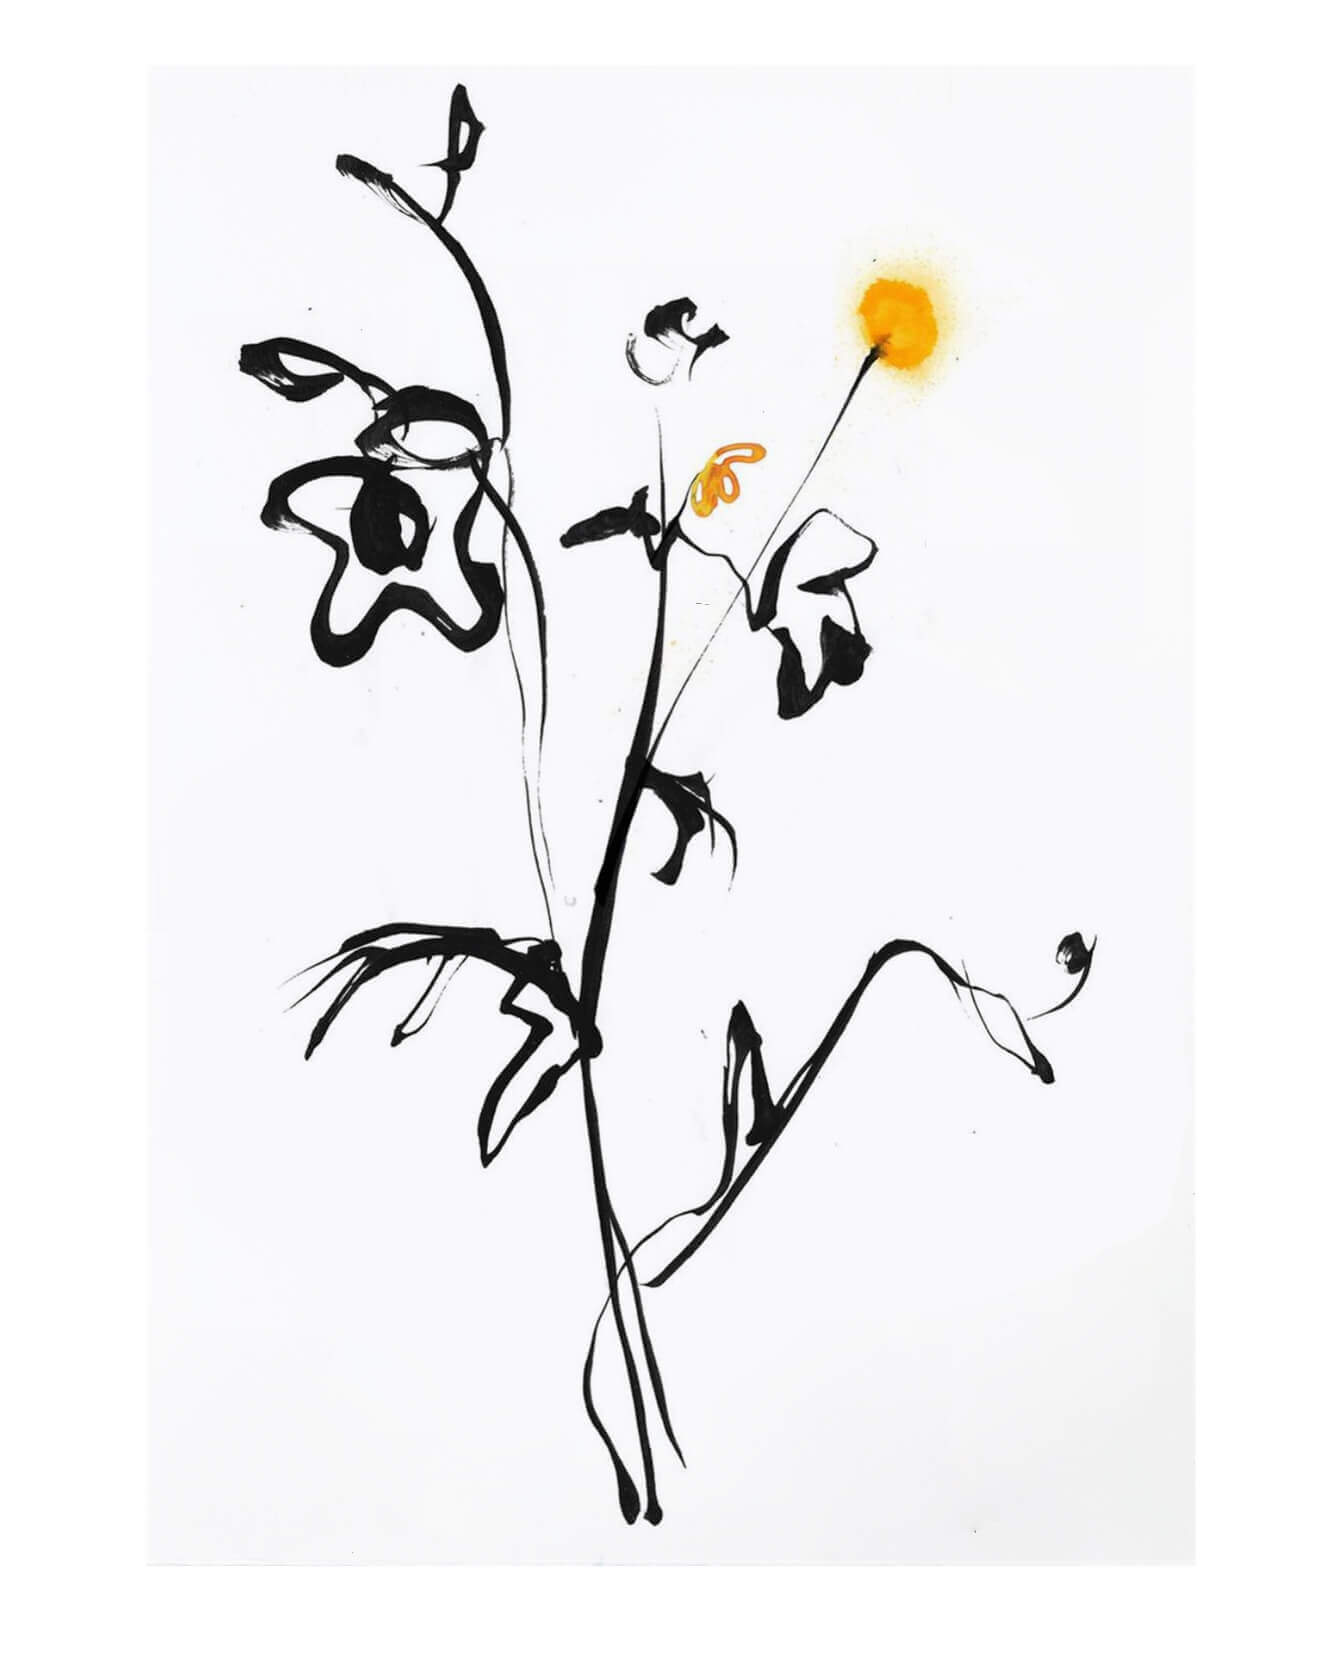 Linear brush strokes in ink. An illustration of a bunch of flowers. Using black ink and yellow ink.